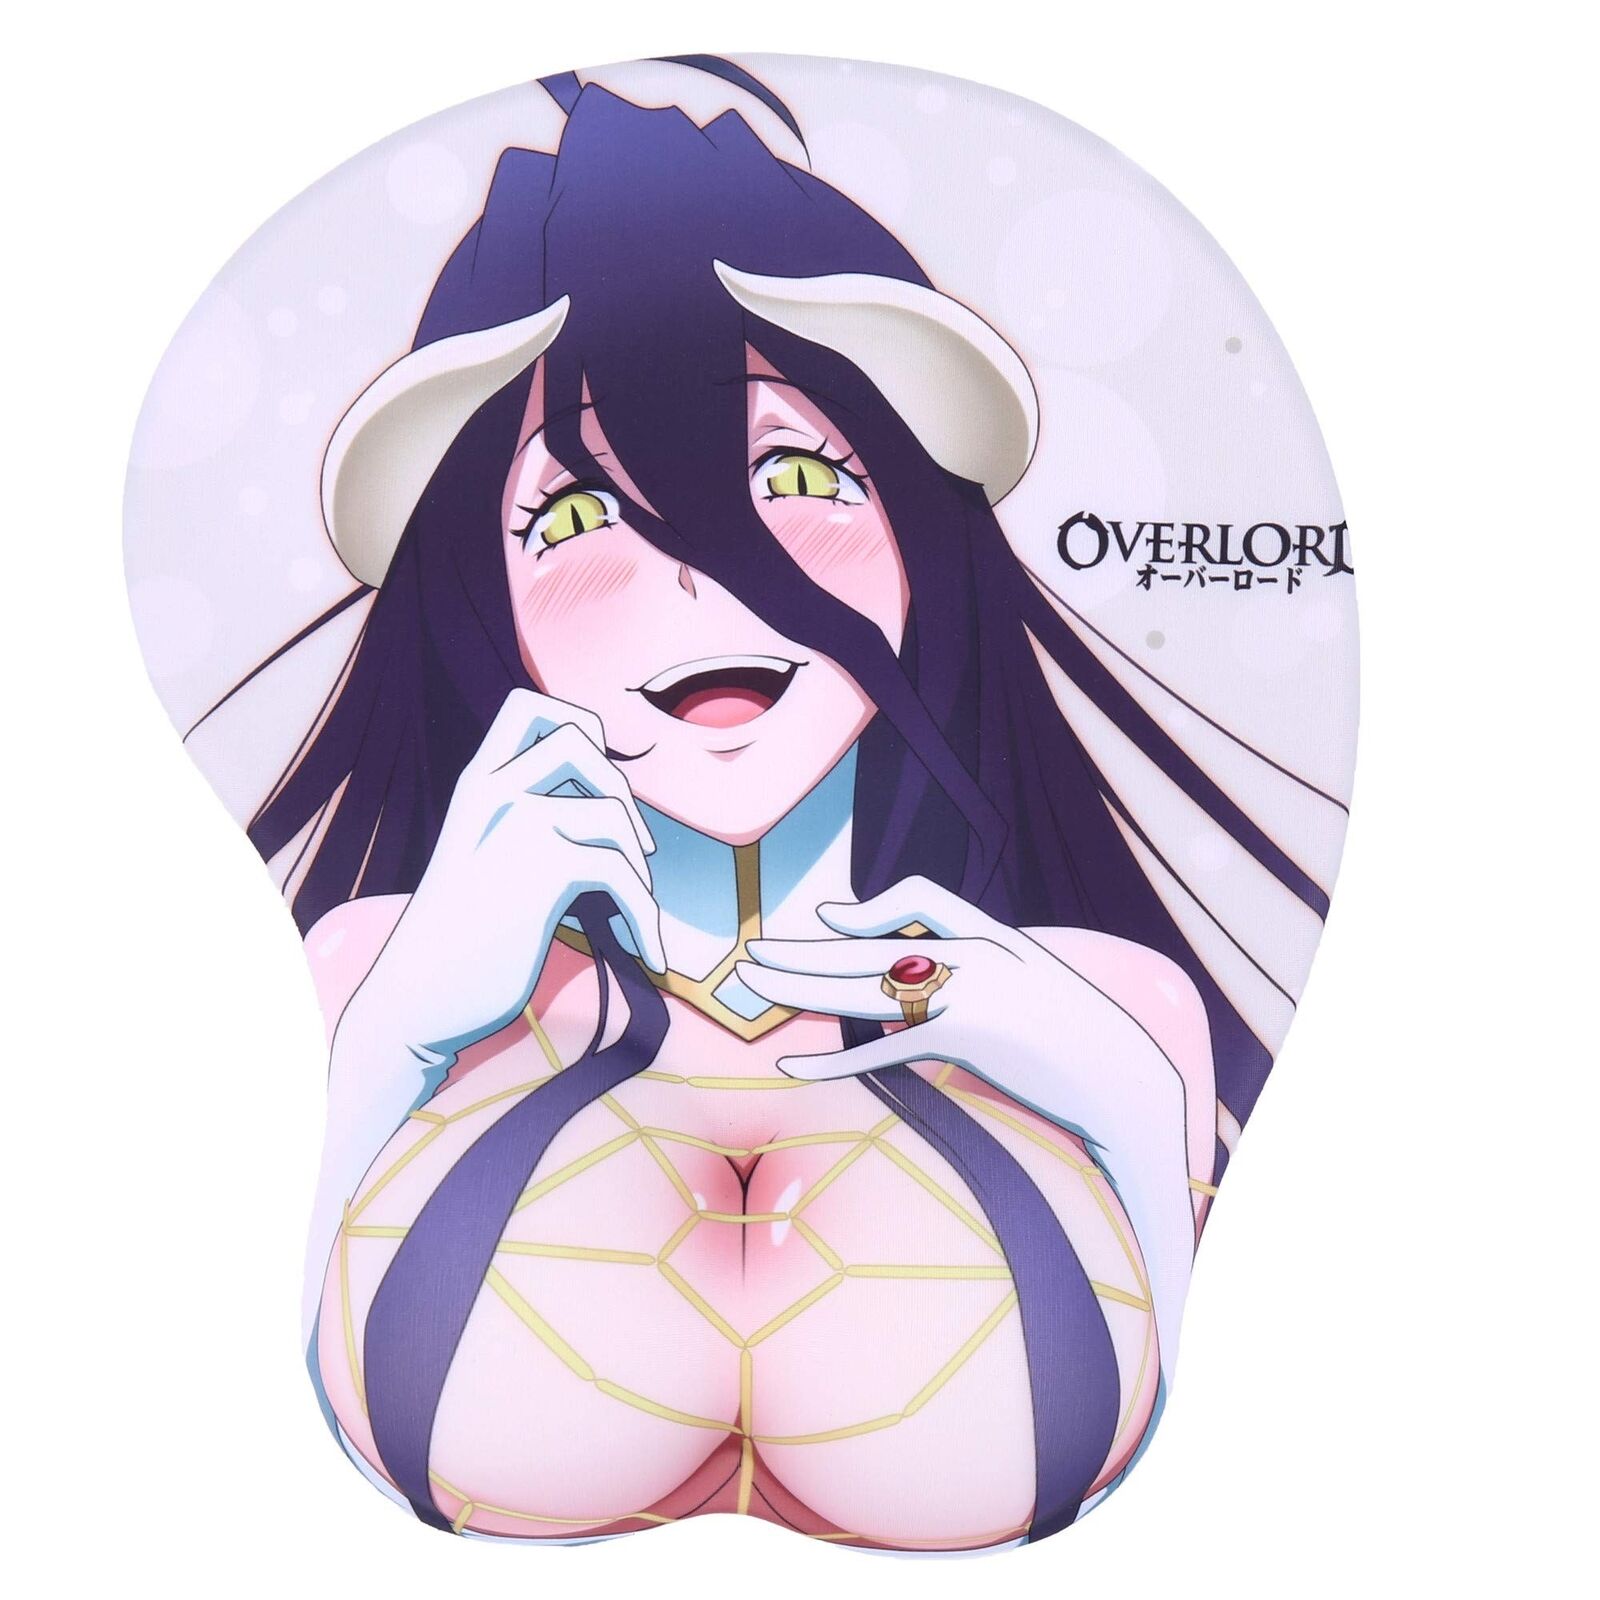 Overlord Albedo 3D Anime Mouse Pads with Wrist Rest Gaming Mousepads 2Way Ski...